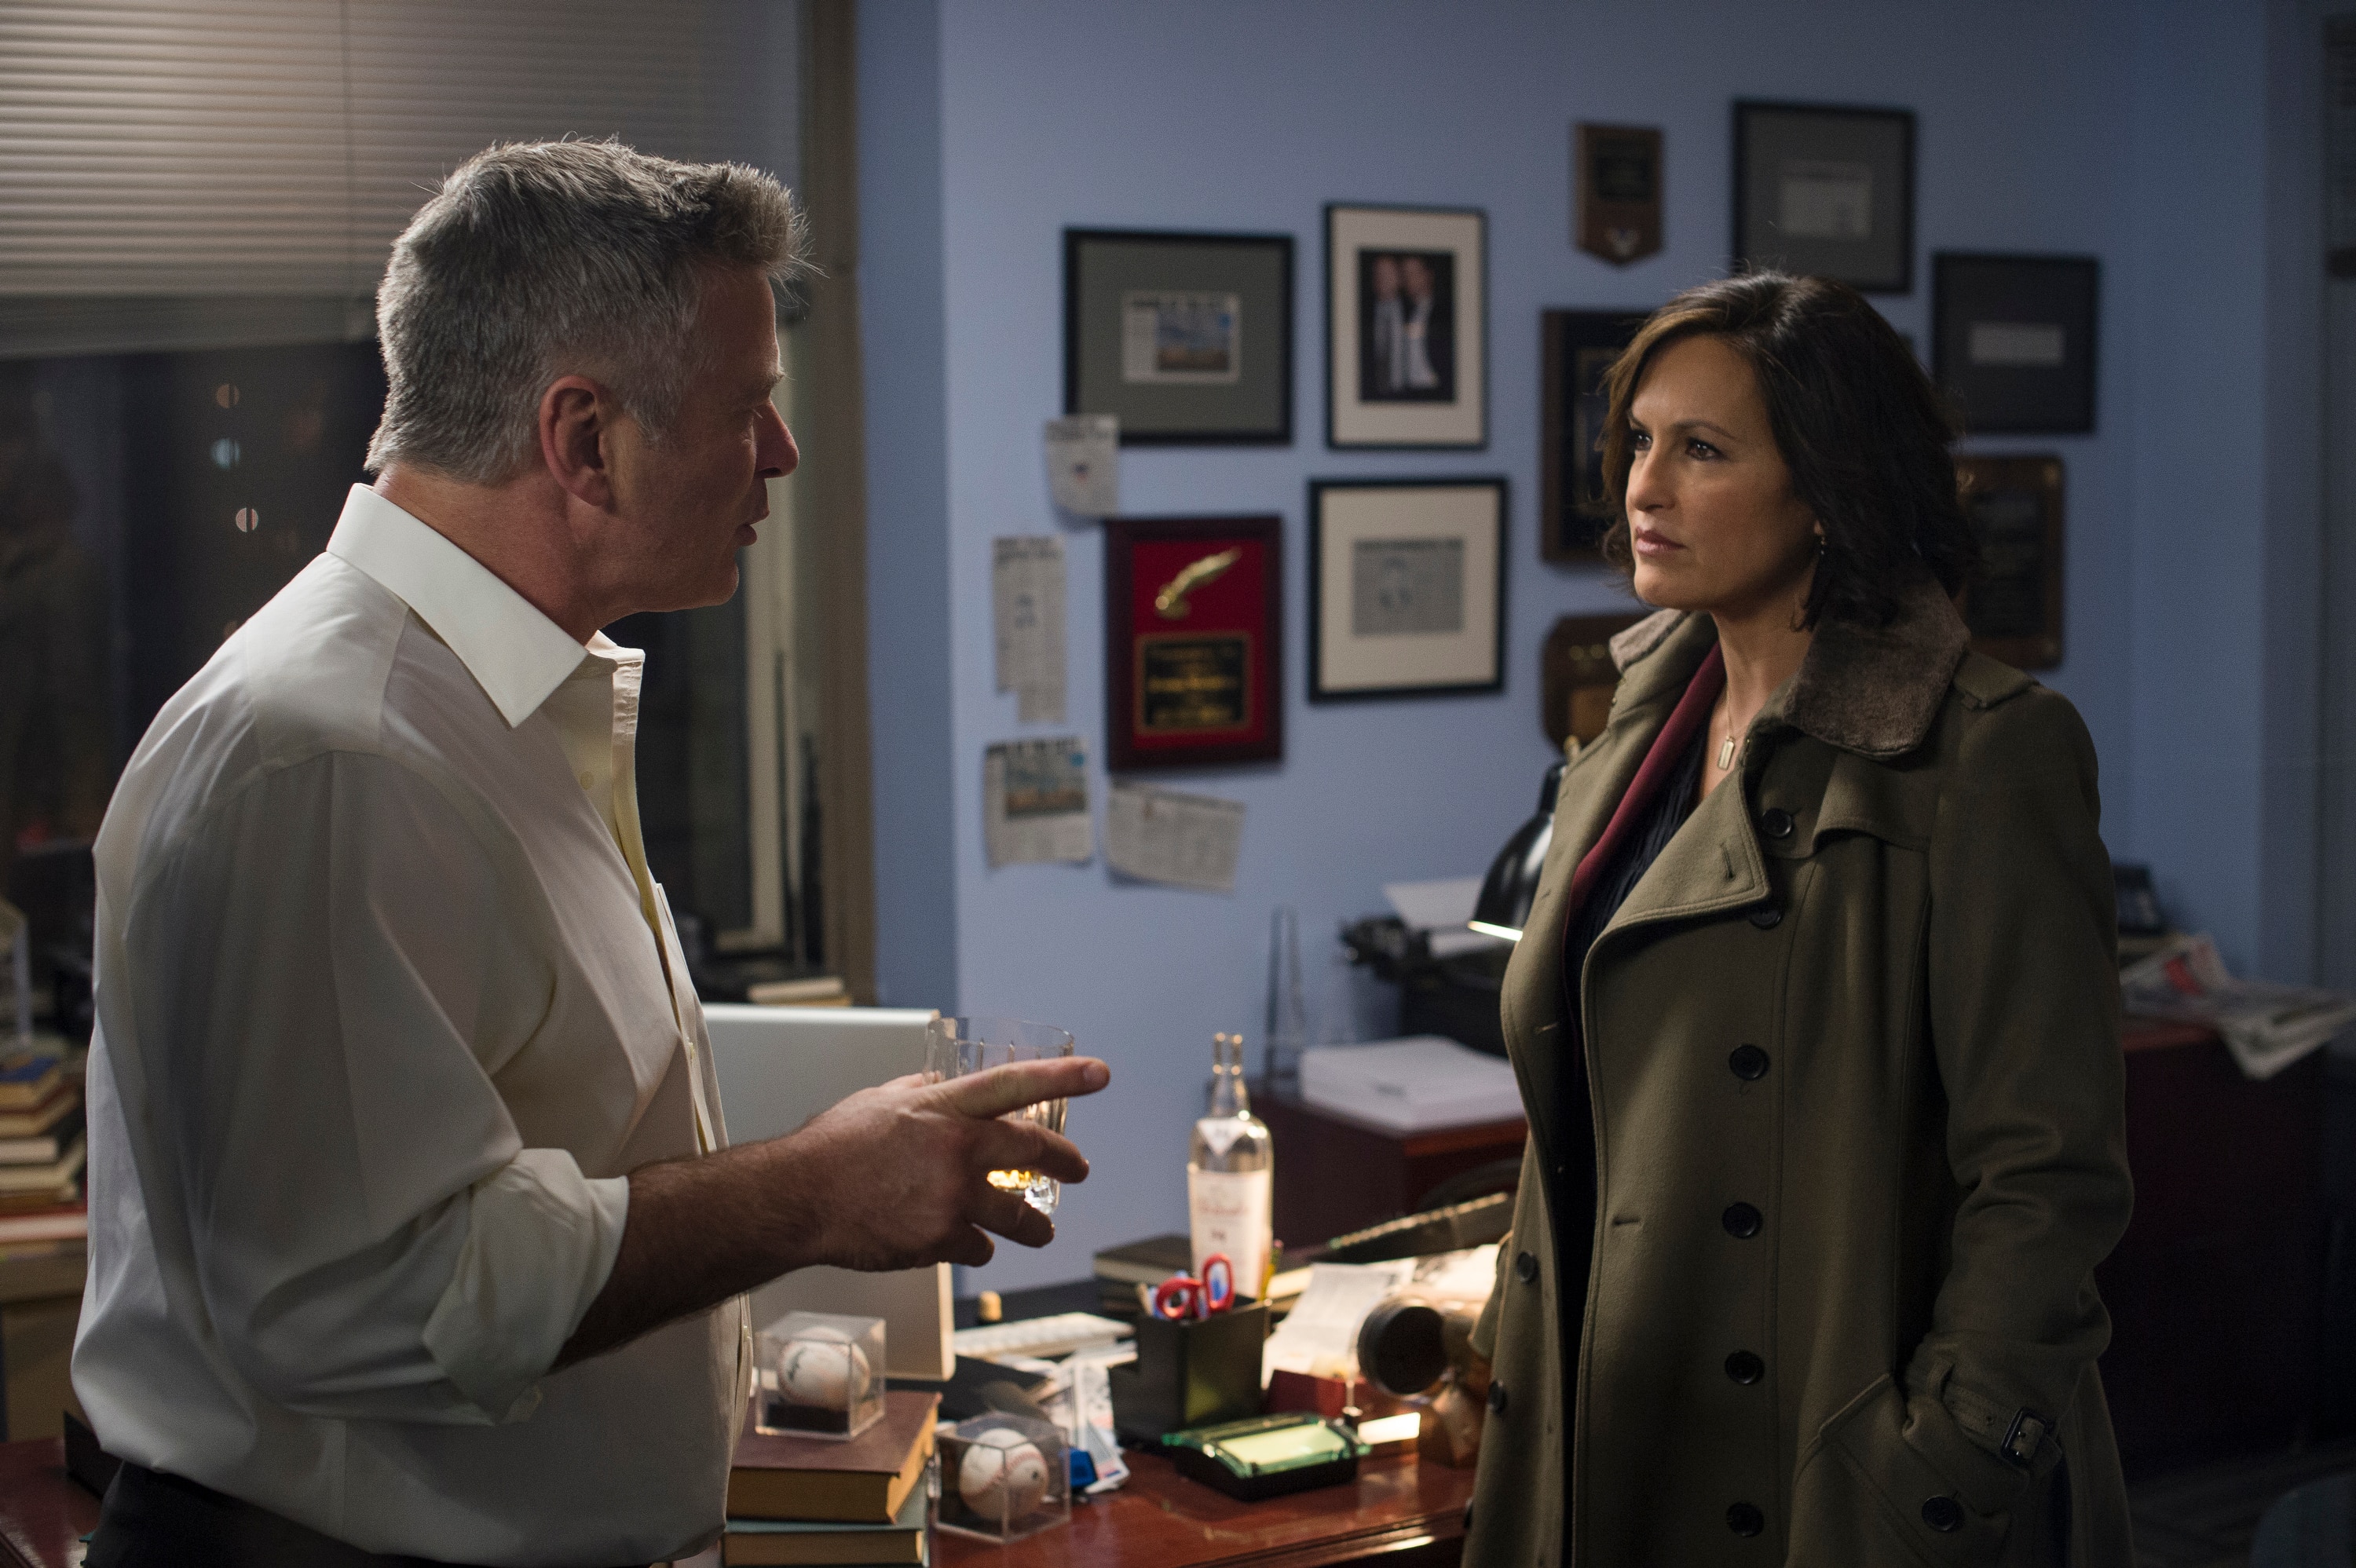 Law & Order: Special Victims Unit: Photos from "Criminal Sto